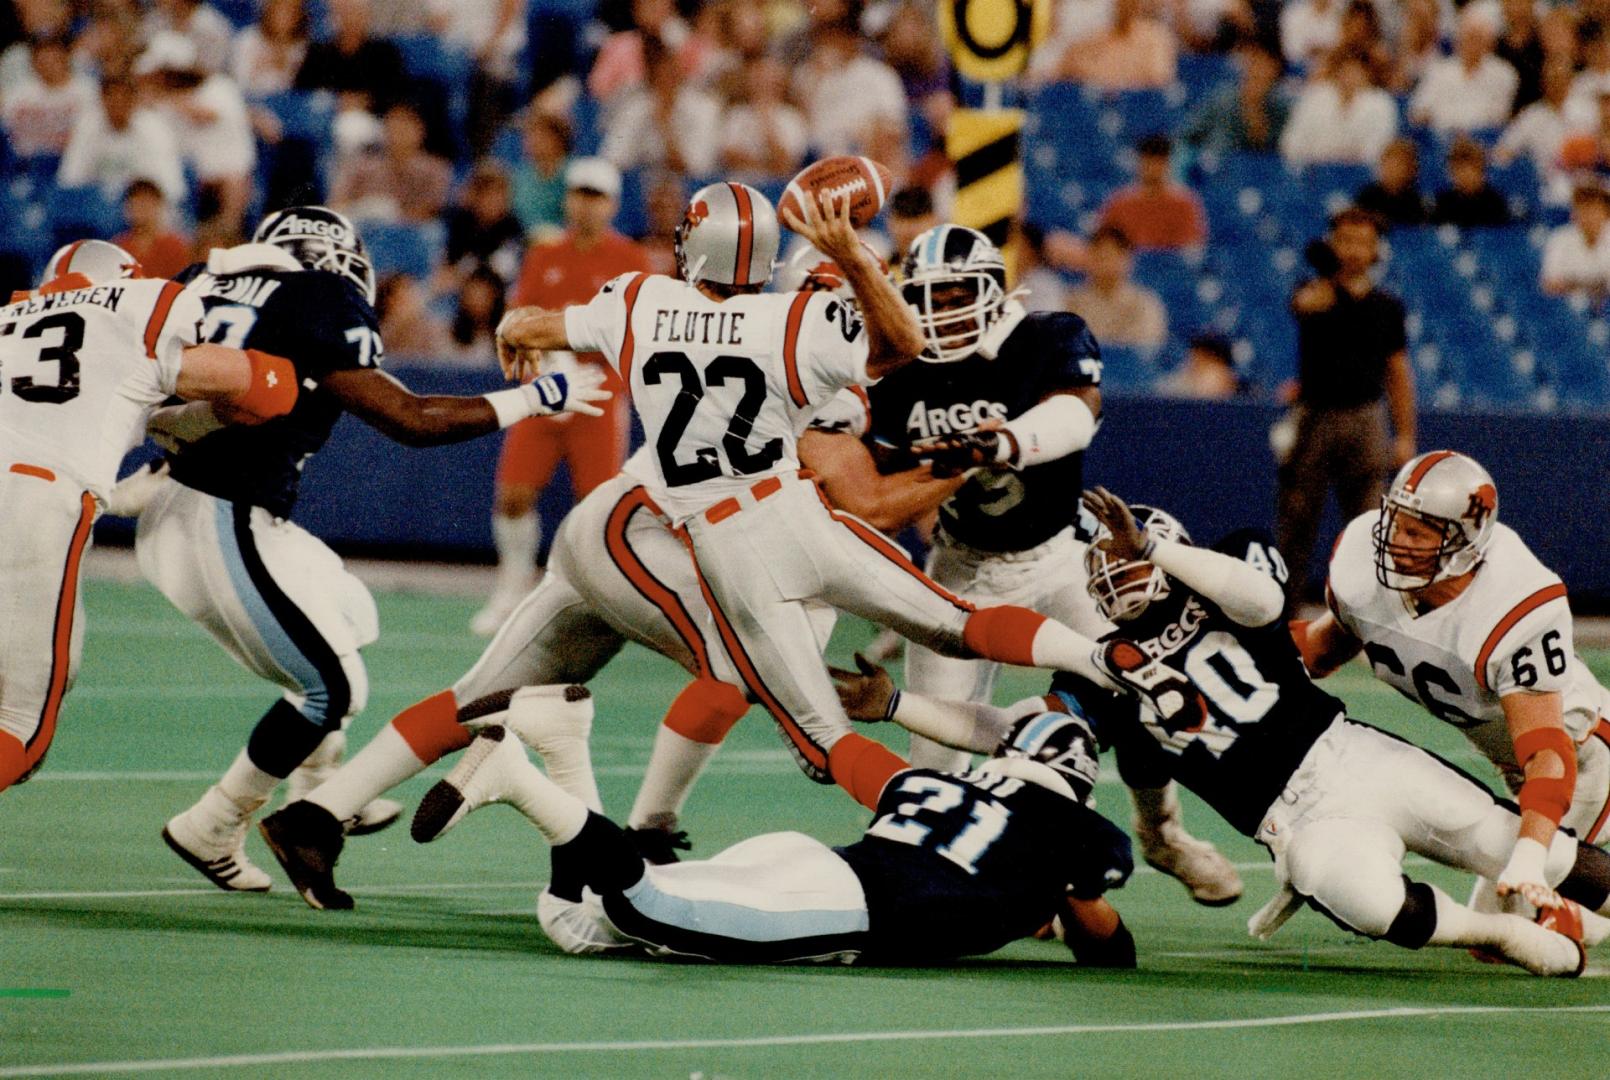 Heap of trouble: B. C. Lions pivot Doug Flutie found himself in a lot of hot water early in the second quarter of yesterday's game. He was picked off (...)